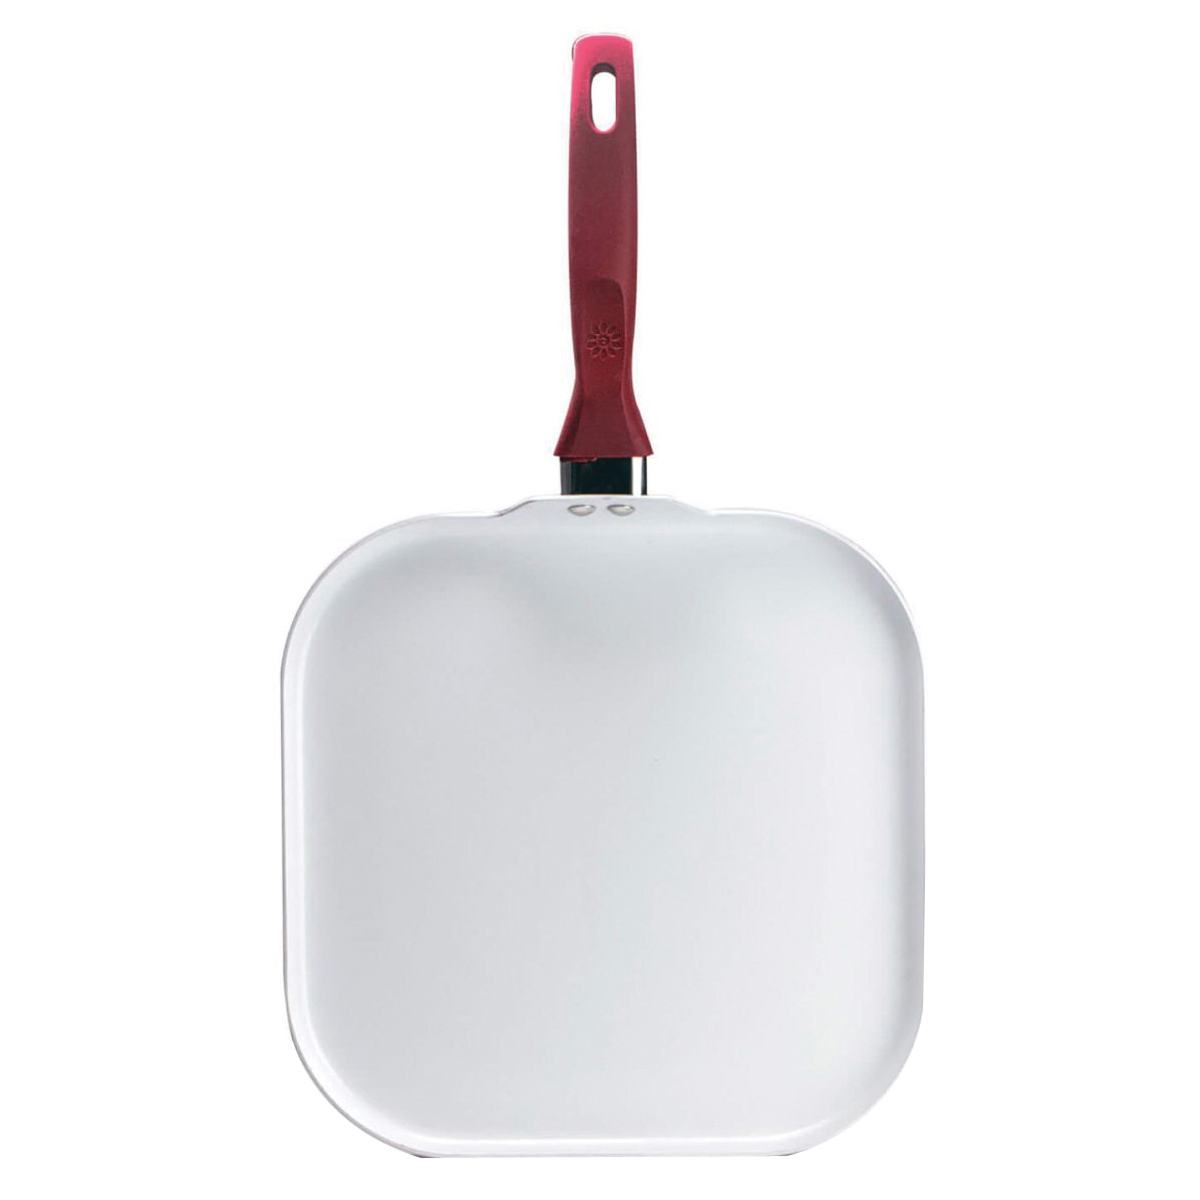 Ecolution Bliss EBCAW-3228 Griddle, Aluminum, Red, Square, Silicone Handle, Dishwasher Safe: No, Easy-Grip Handle - 2